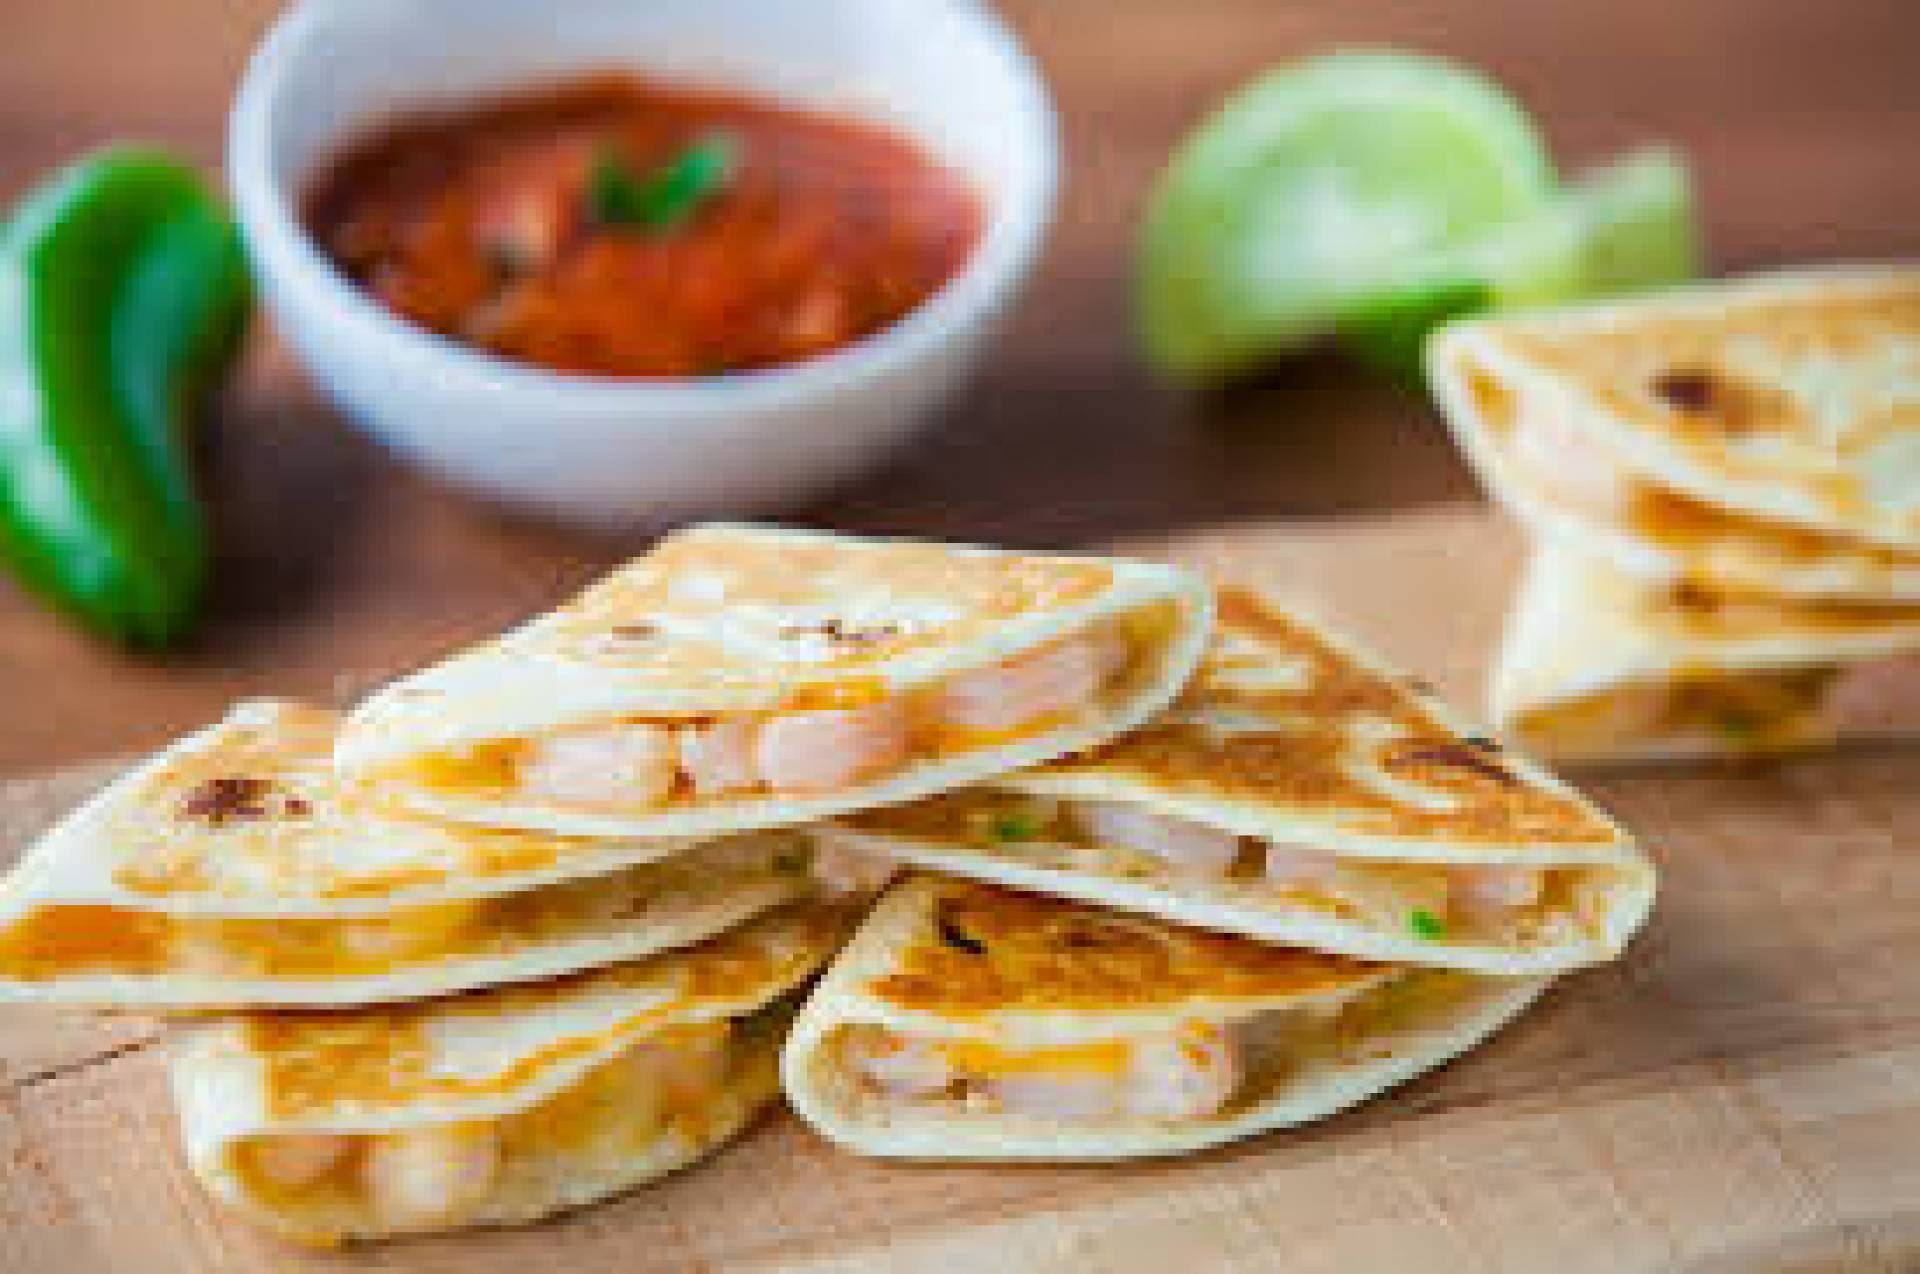 Shrimp Quesadilla on 0 Net Carb Tortilla with Salsa Packets - Low Fat